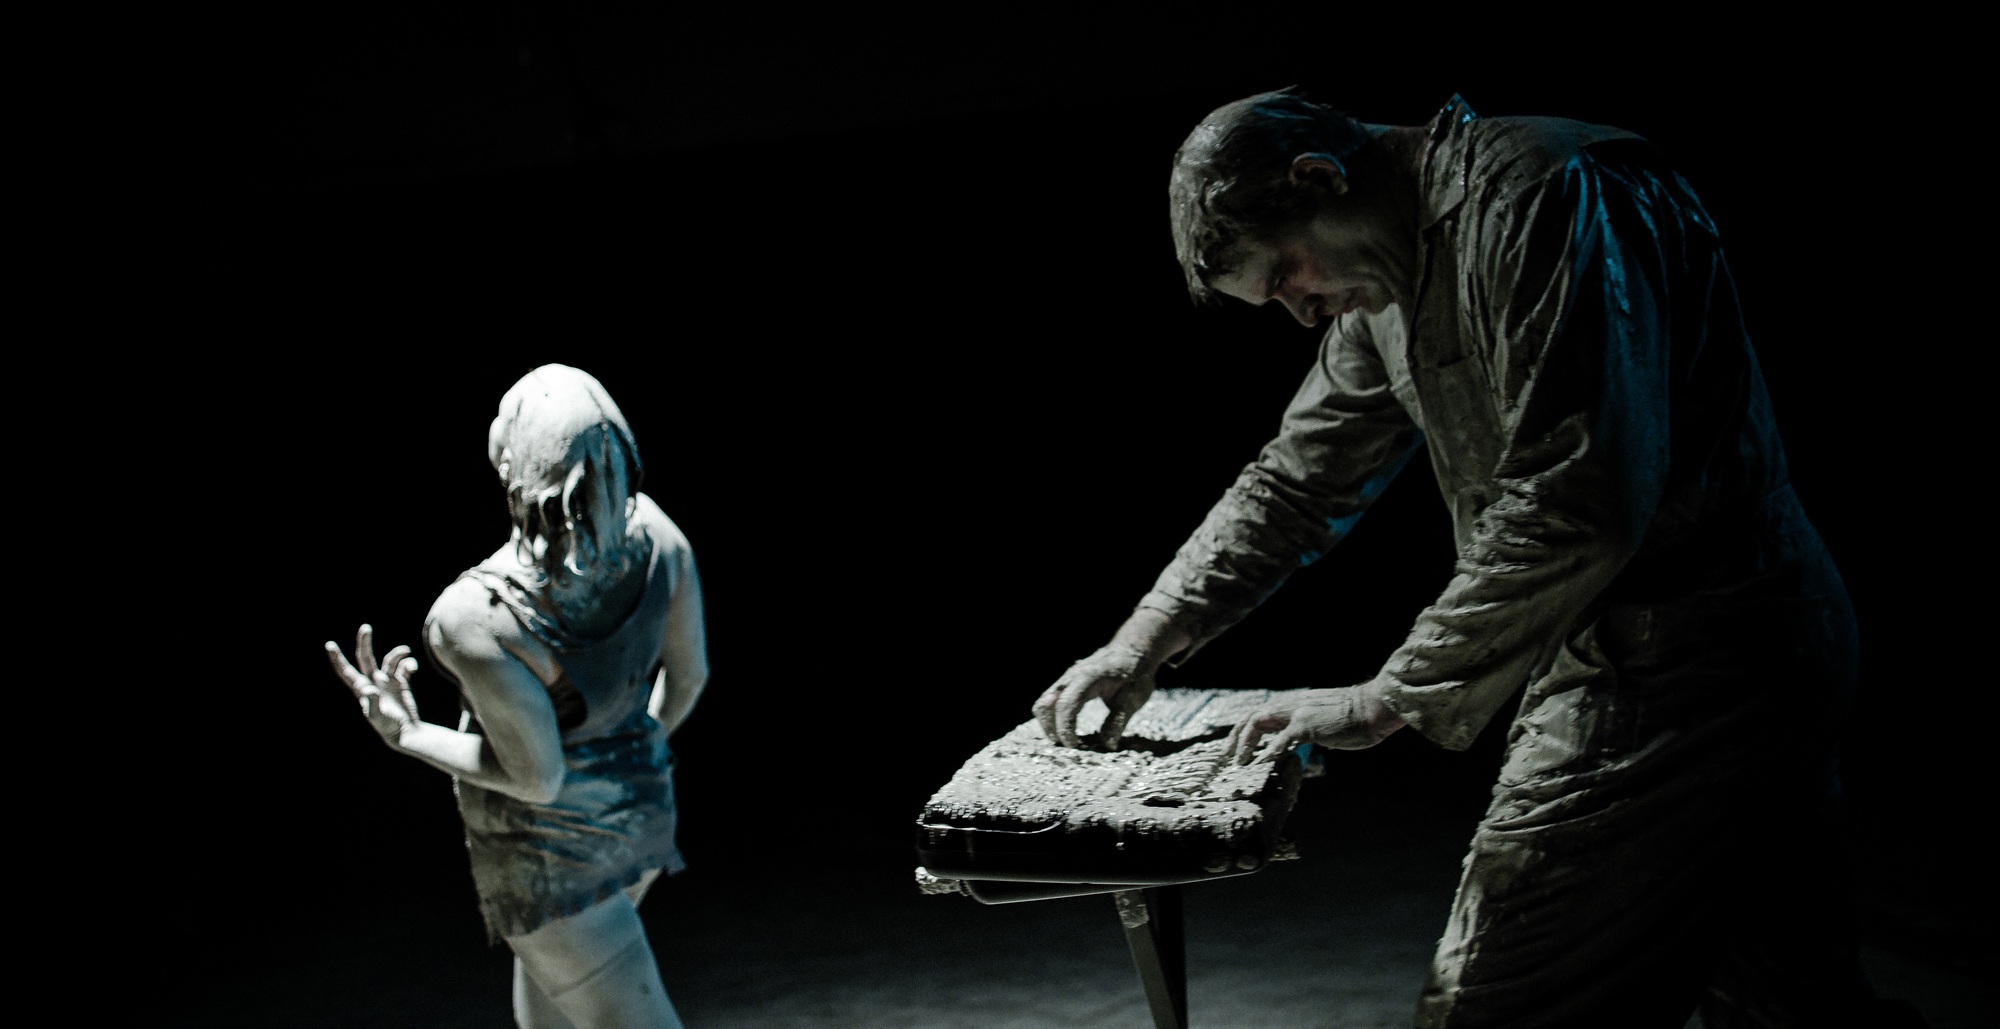 Man and woman covered in clay plays keyboards and dances in dark room lit from above.